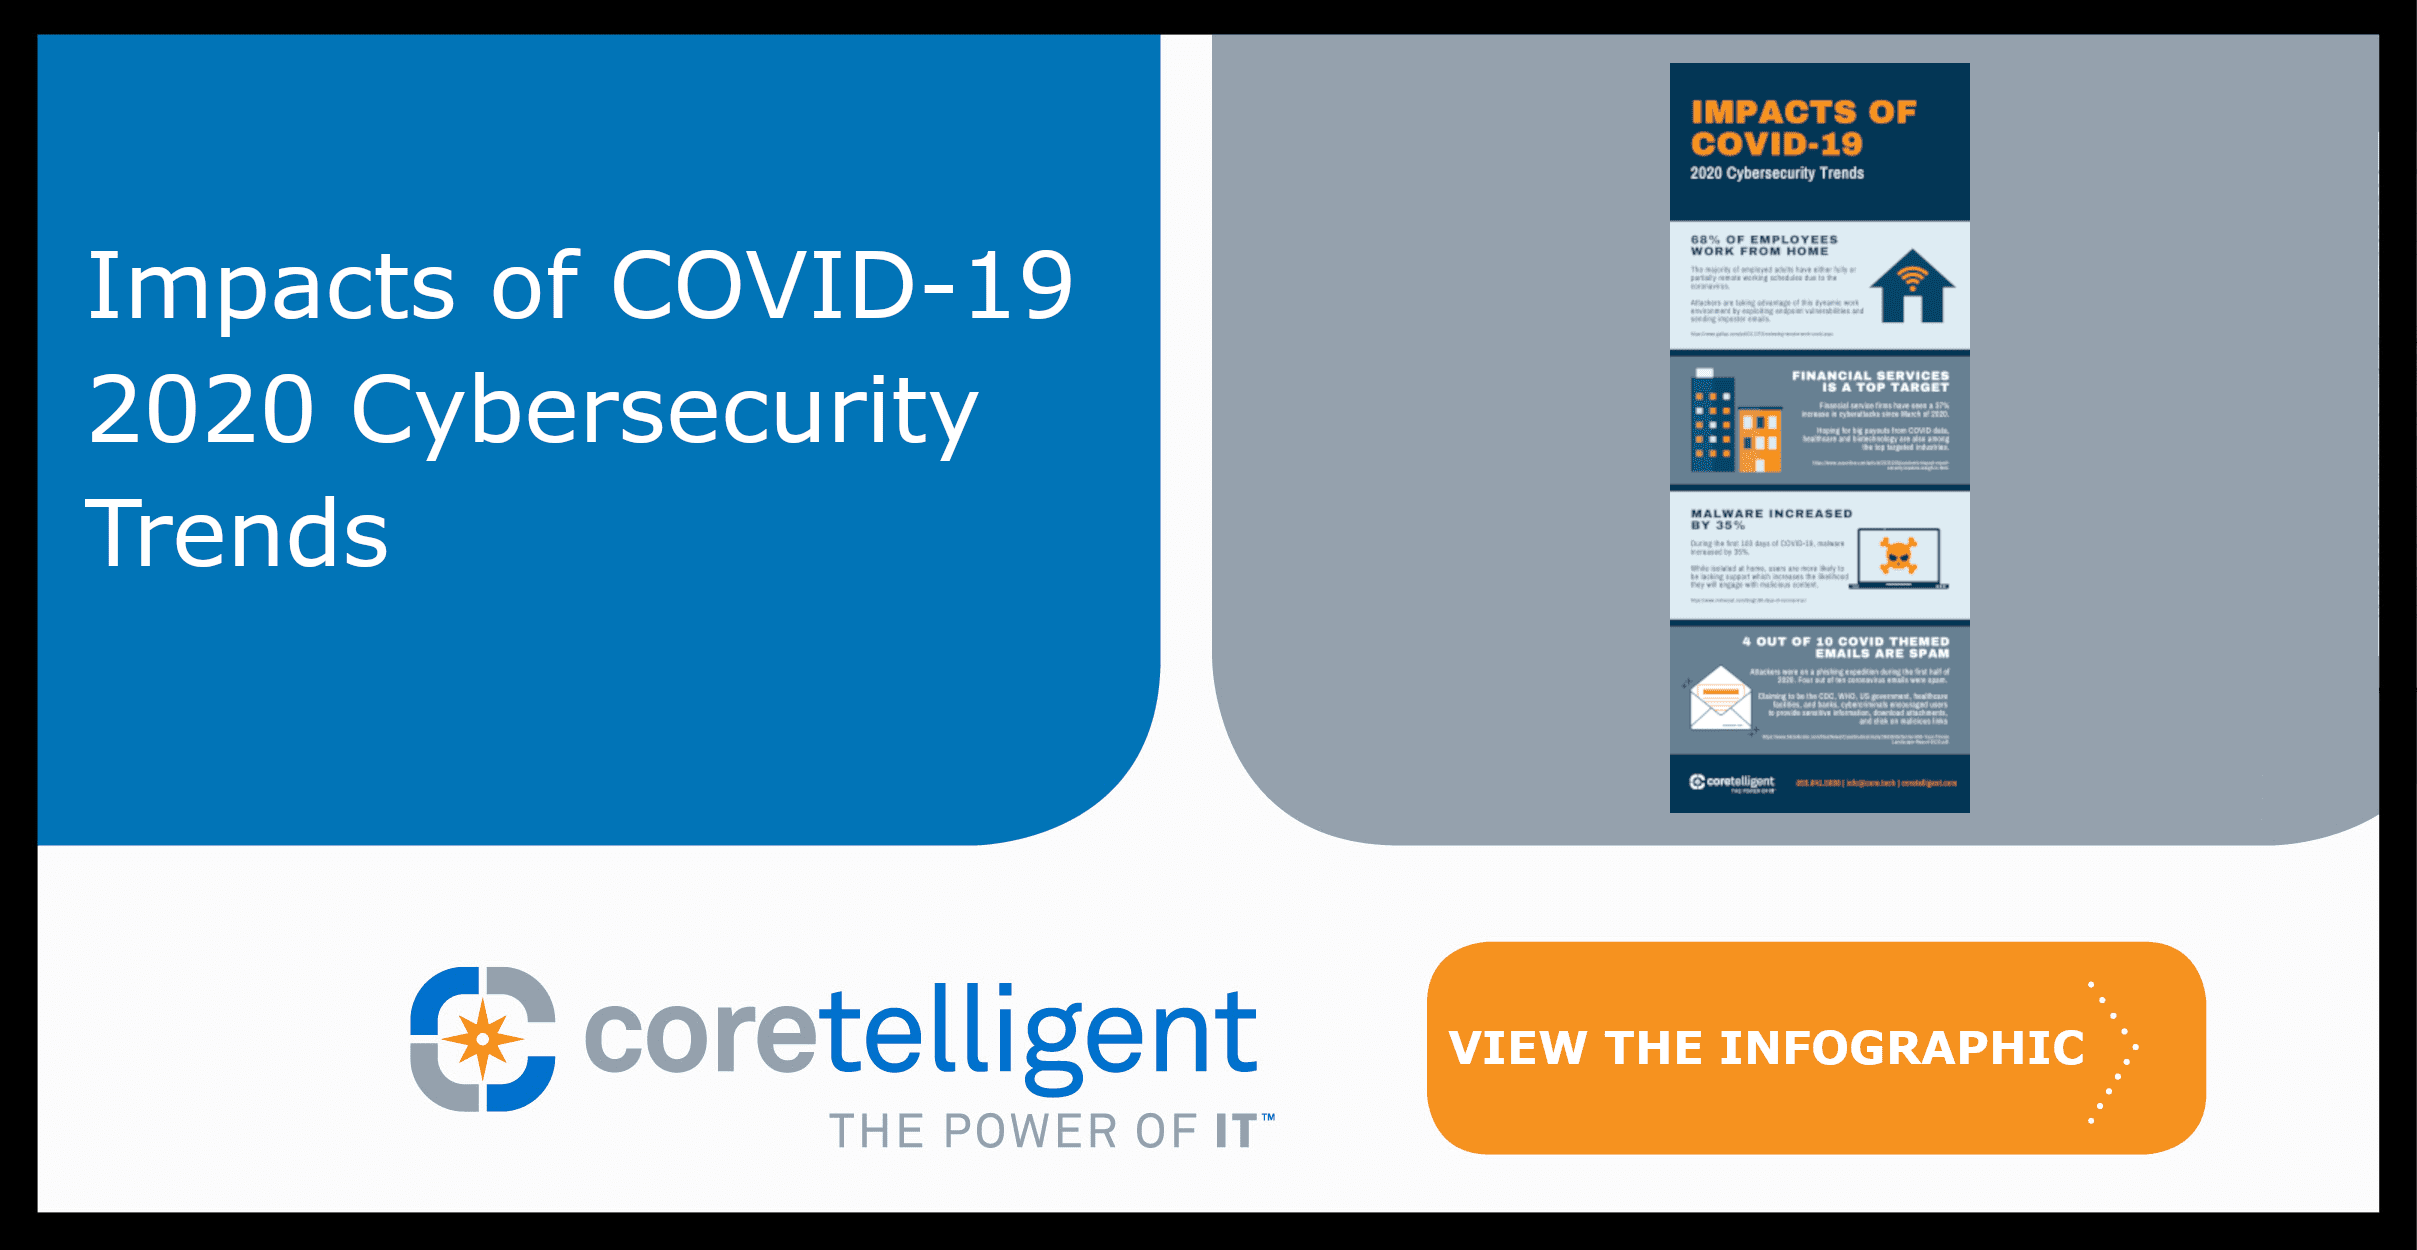 Impacts of COVID-19 2020 Cybersecurity Trends Infographic